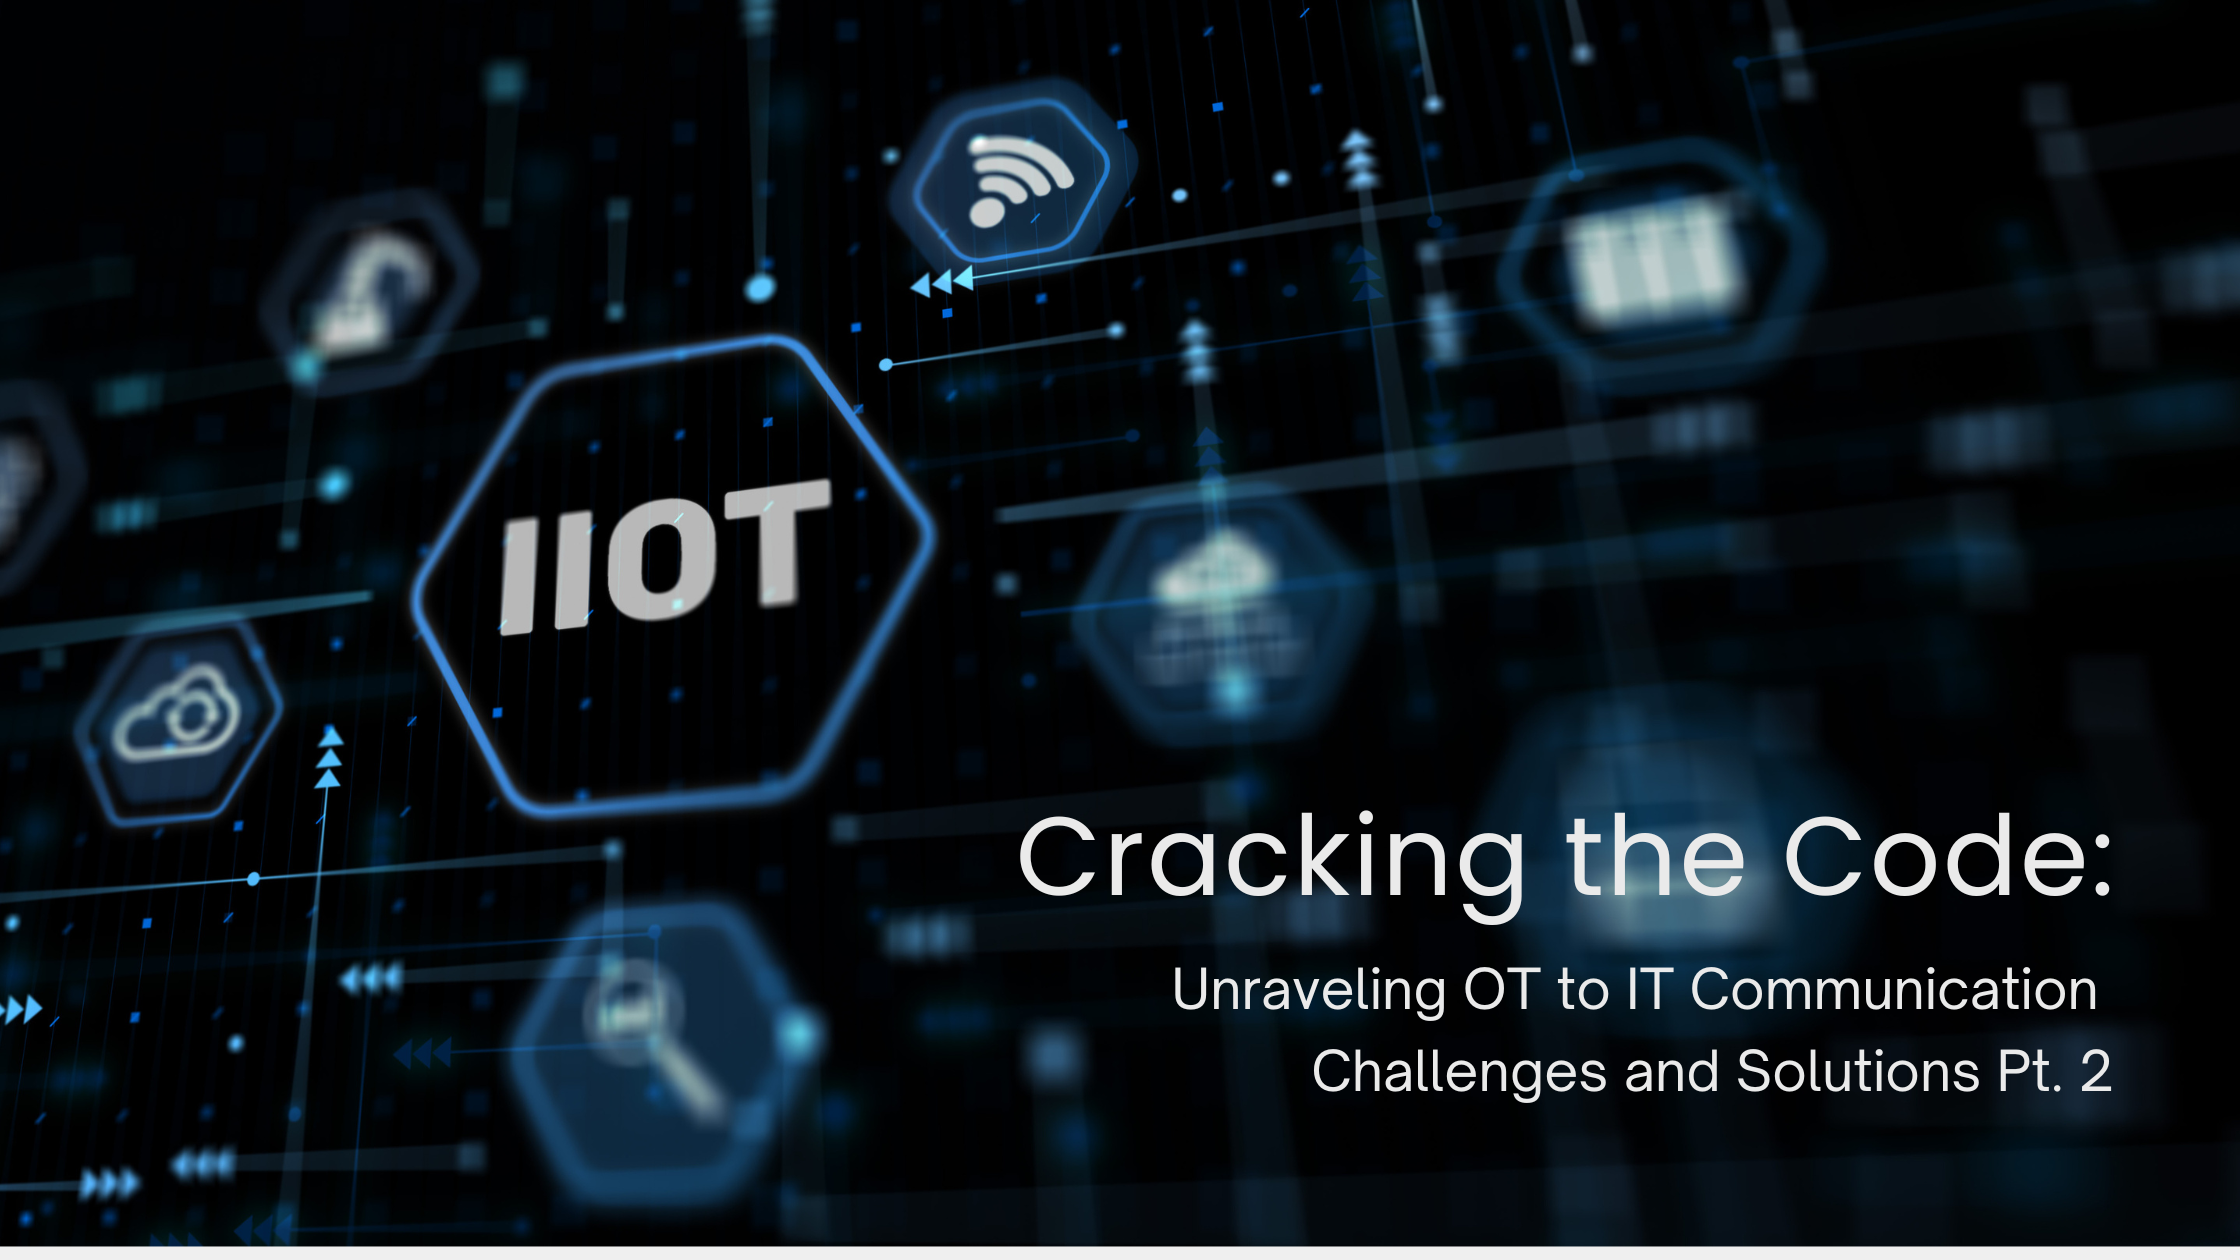 Cracking the Code Pt 2: Unraveling OT to IT Communication Challenges and Solutions